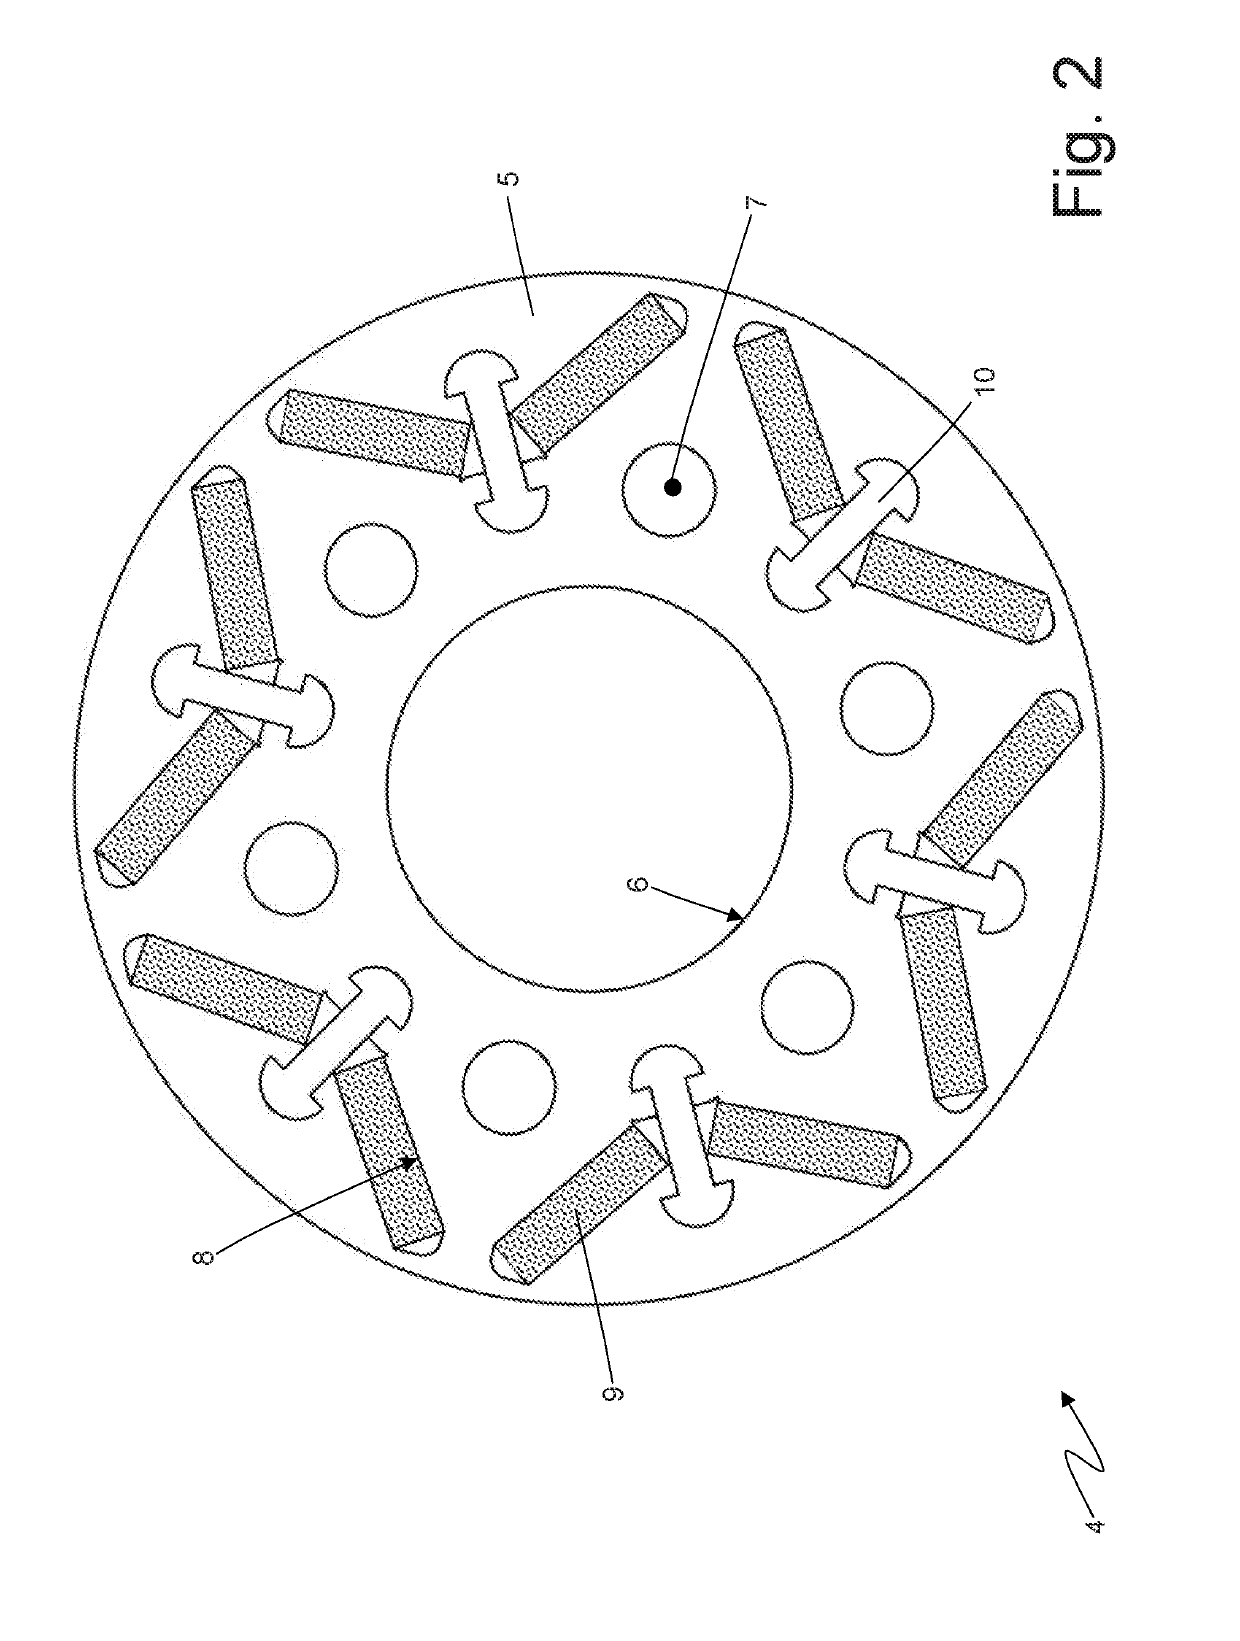 Rotor for a rotary electric machine